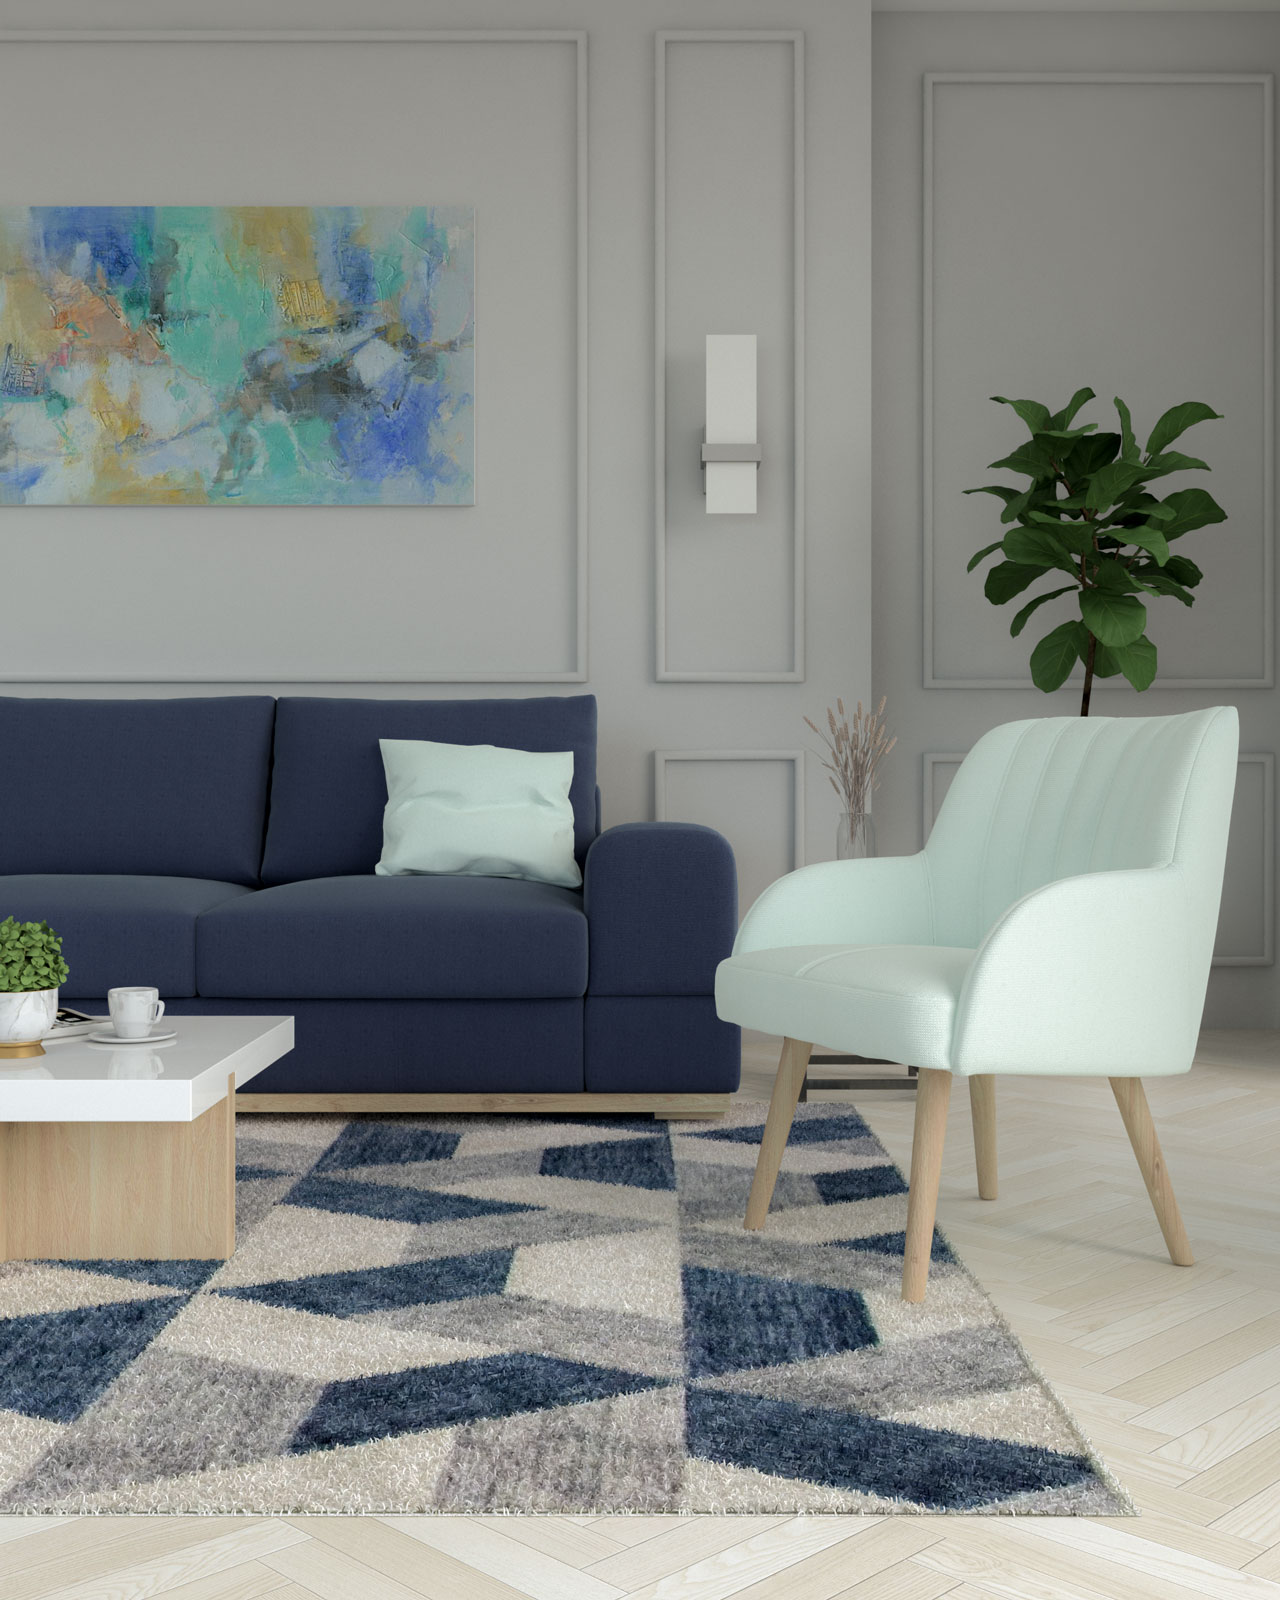 Living room with blue sofa and mint chair